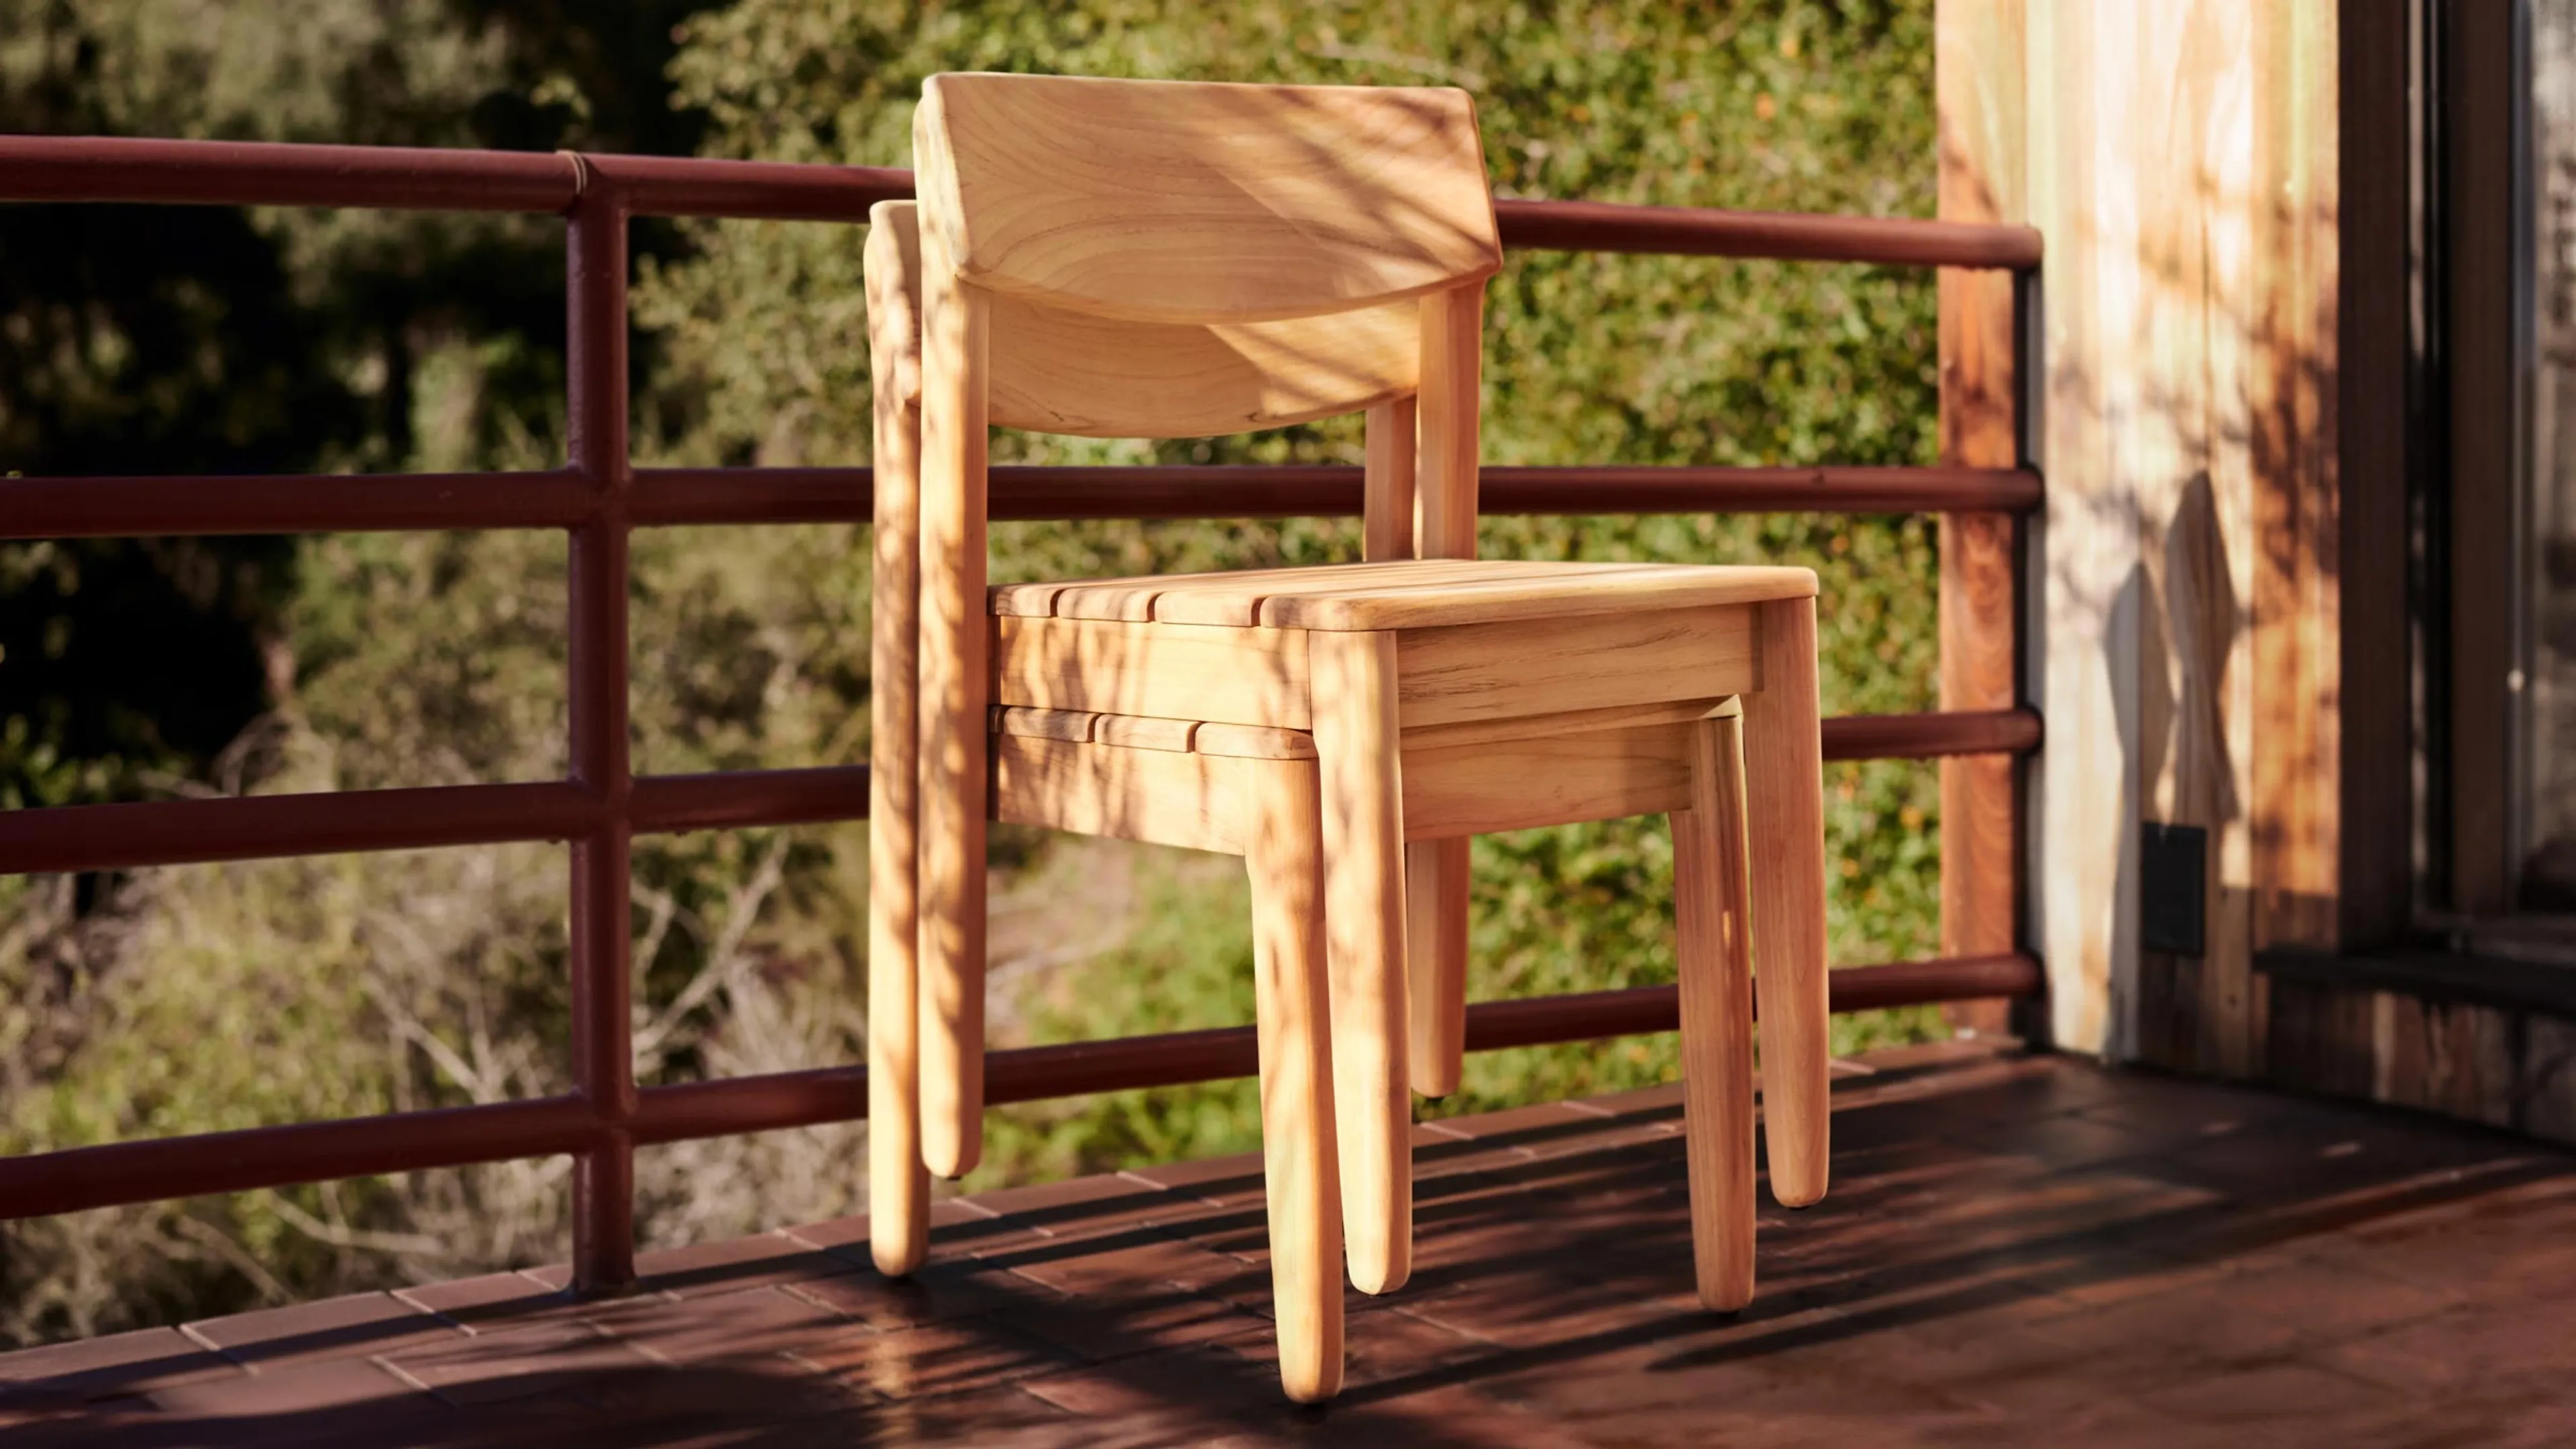 teak outdoor dining chairs